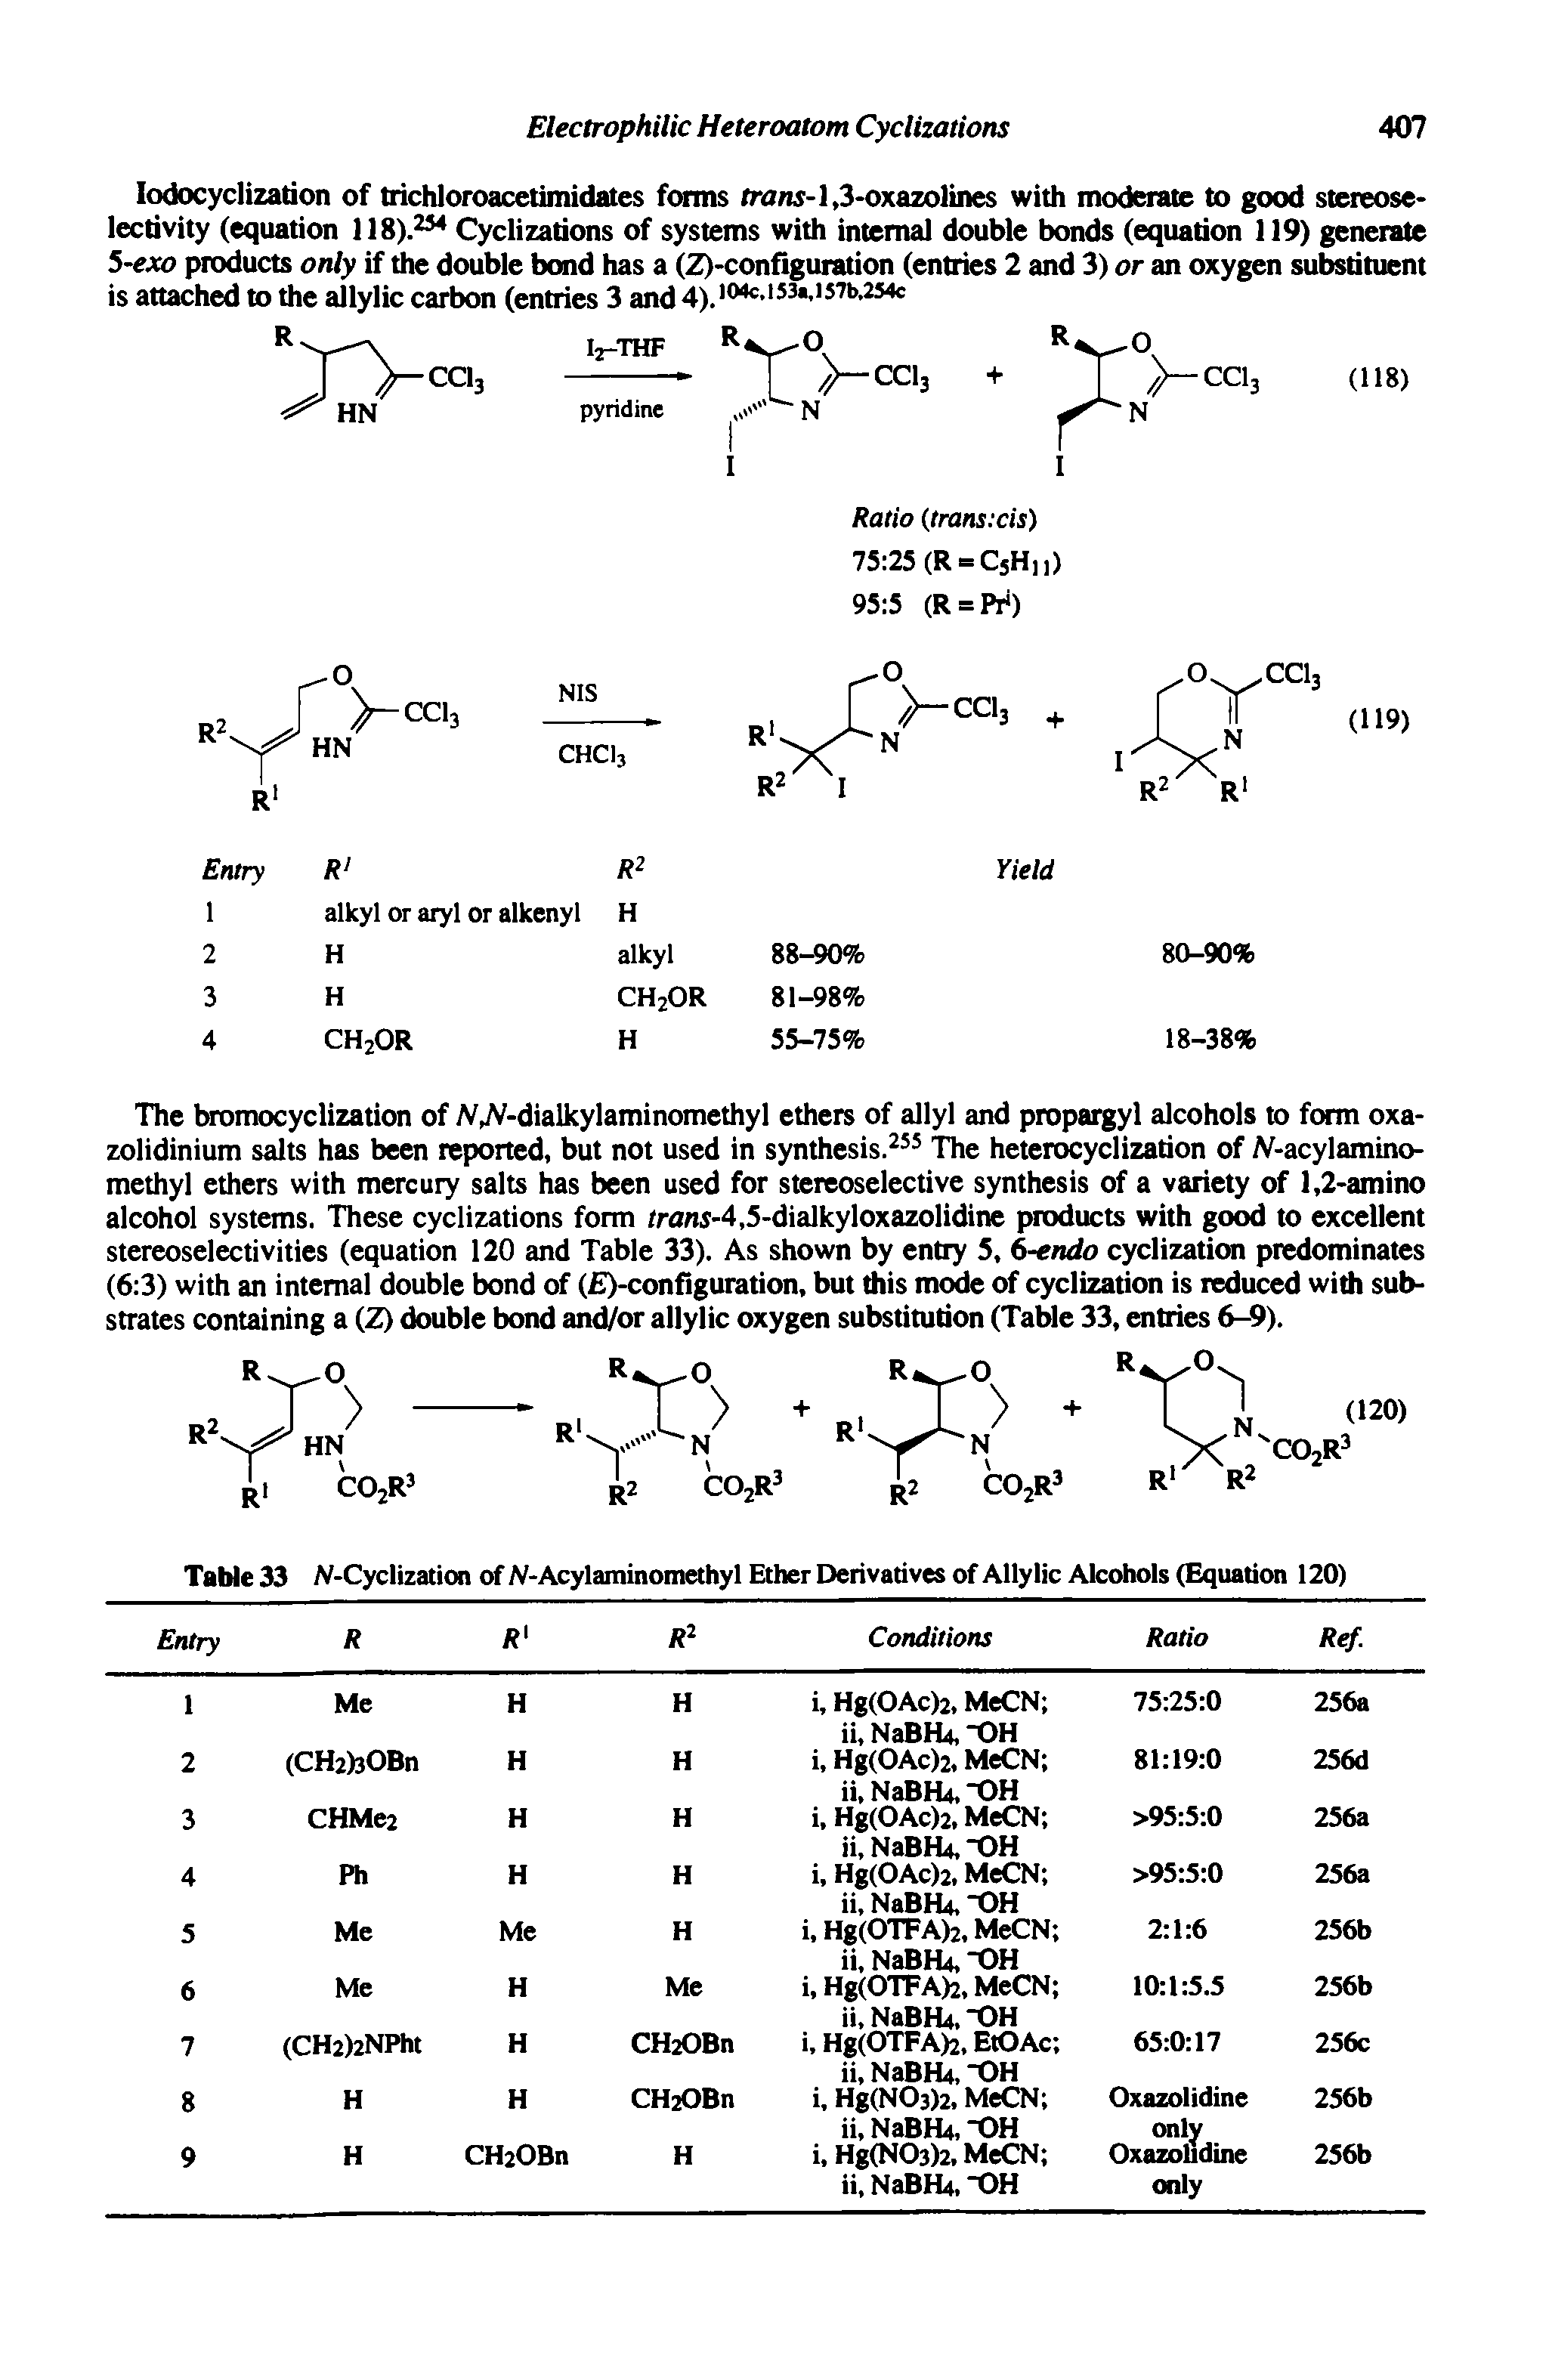 Table 33 N-Cyclization of N-Acylaminomethyl Ether Derivatives of Allylic Alcohols (Equation 120)...